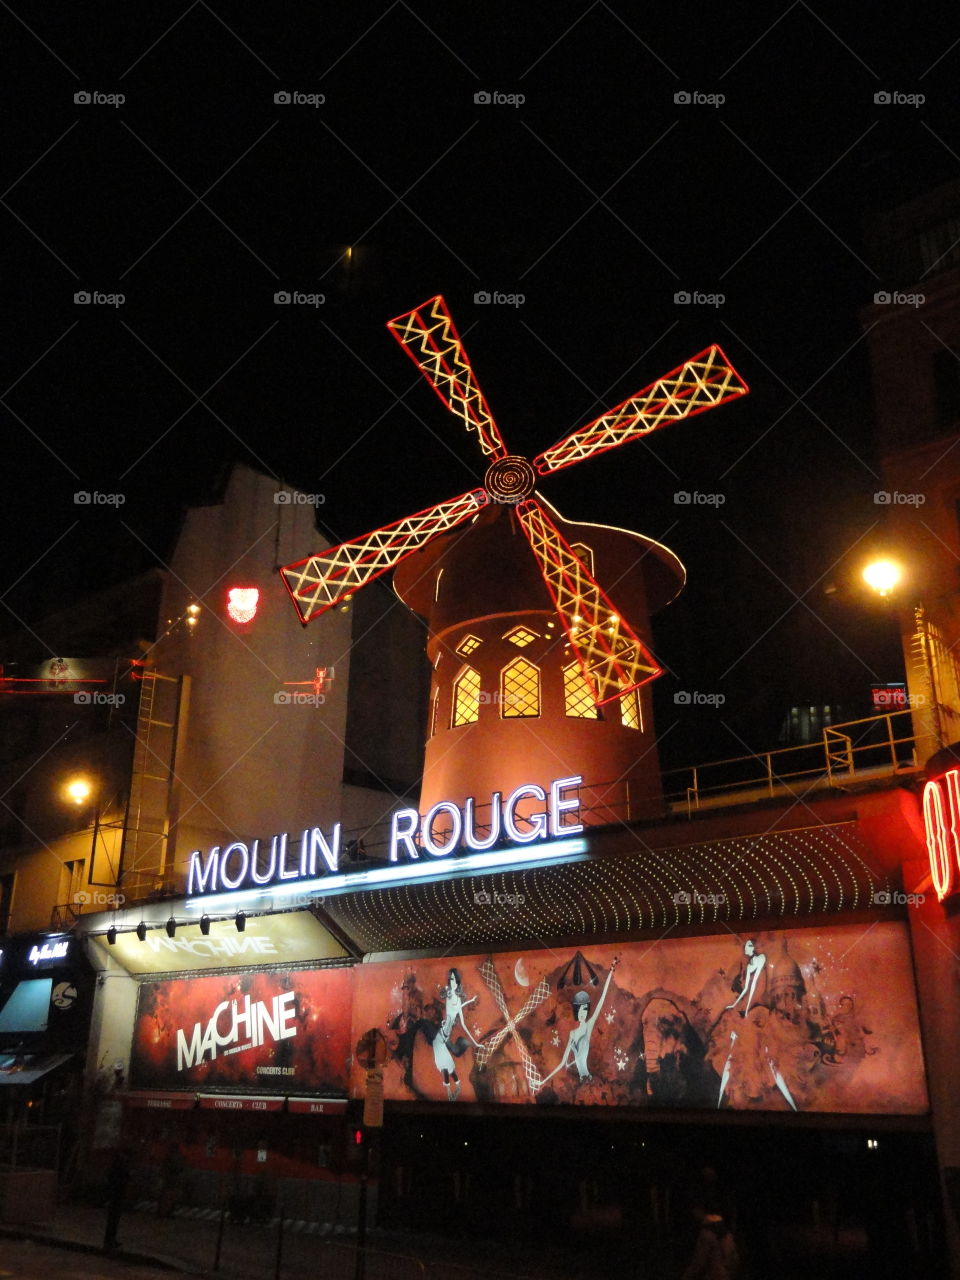 moulin rouge at night. Europe trip. lots of sightseeing.